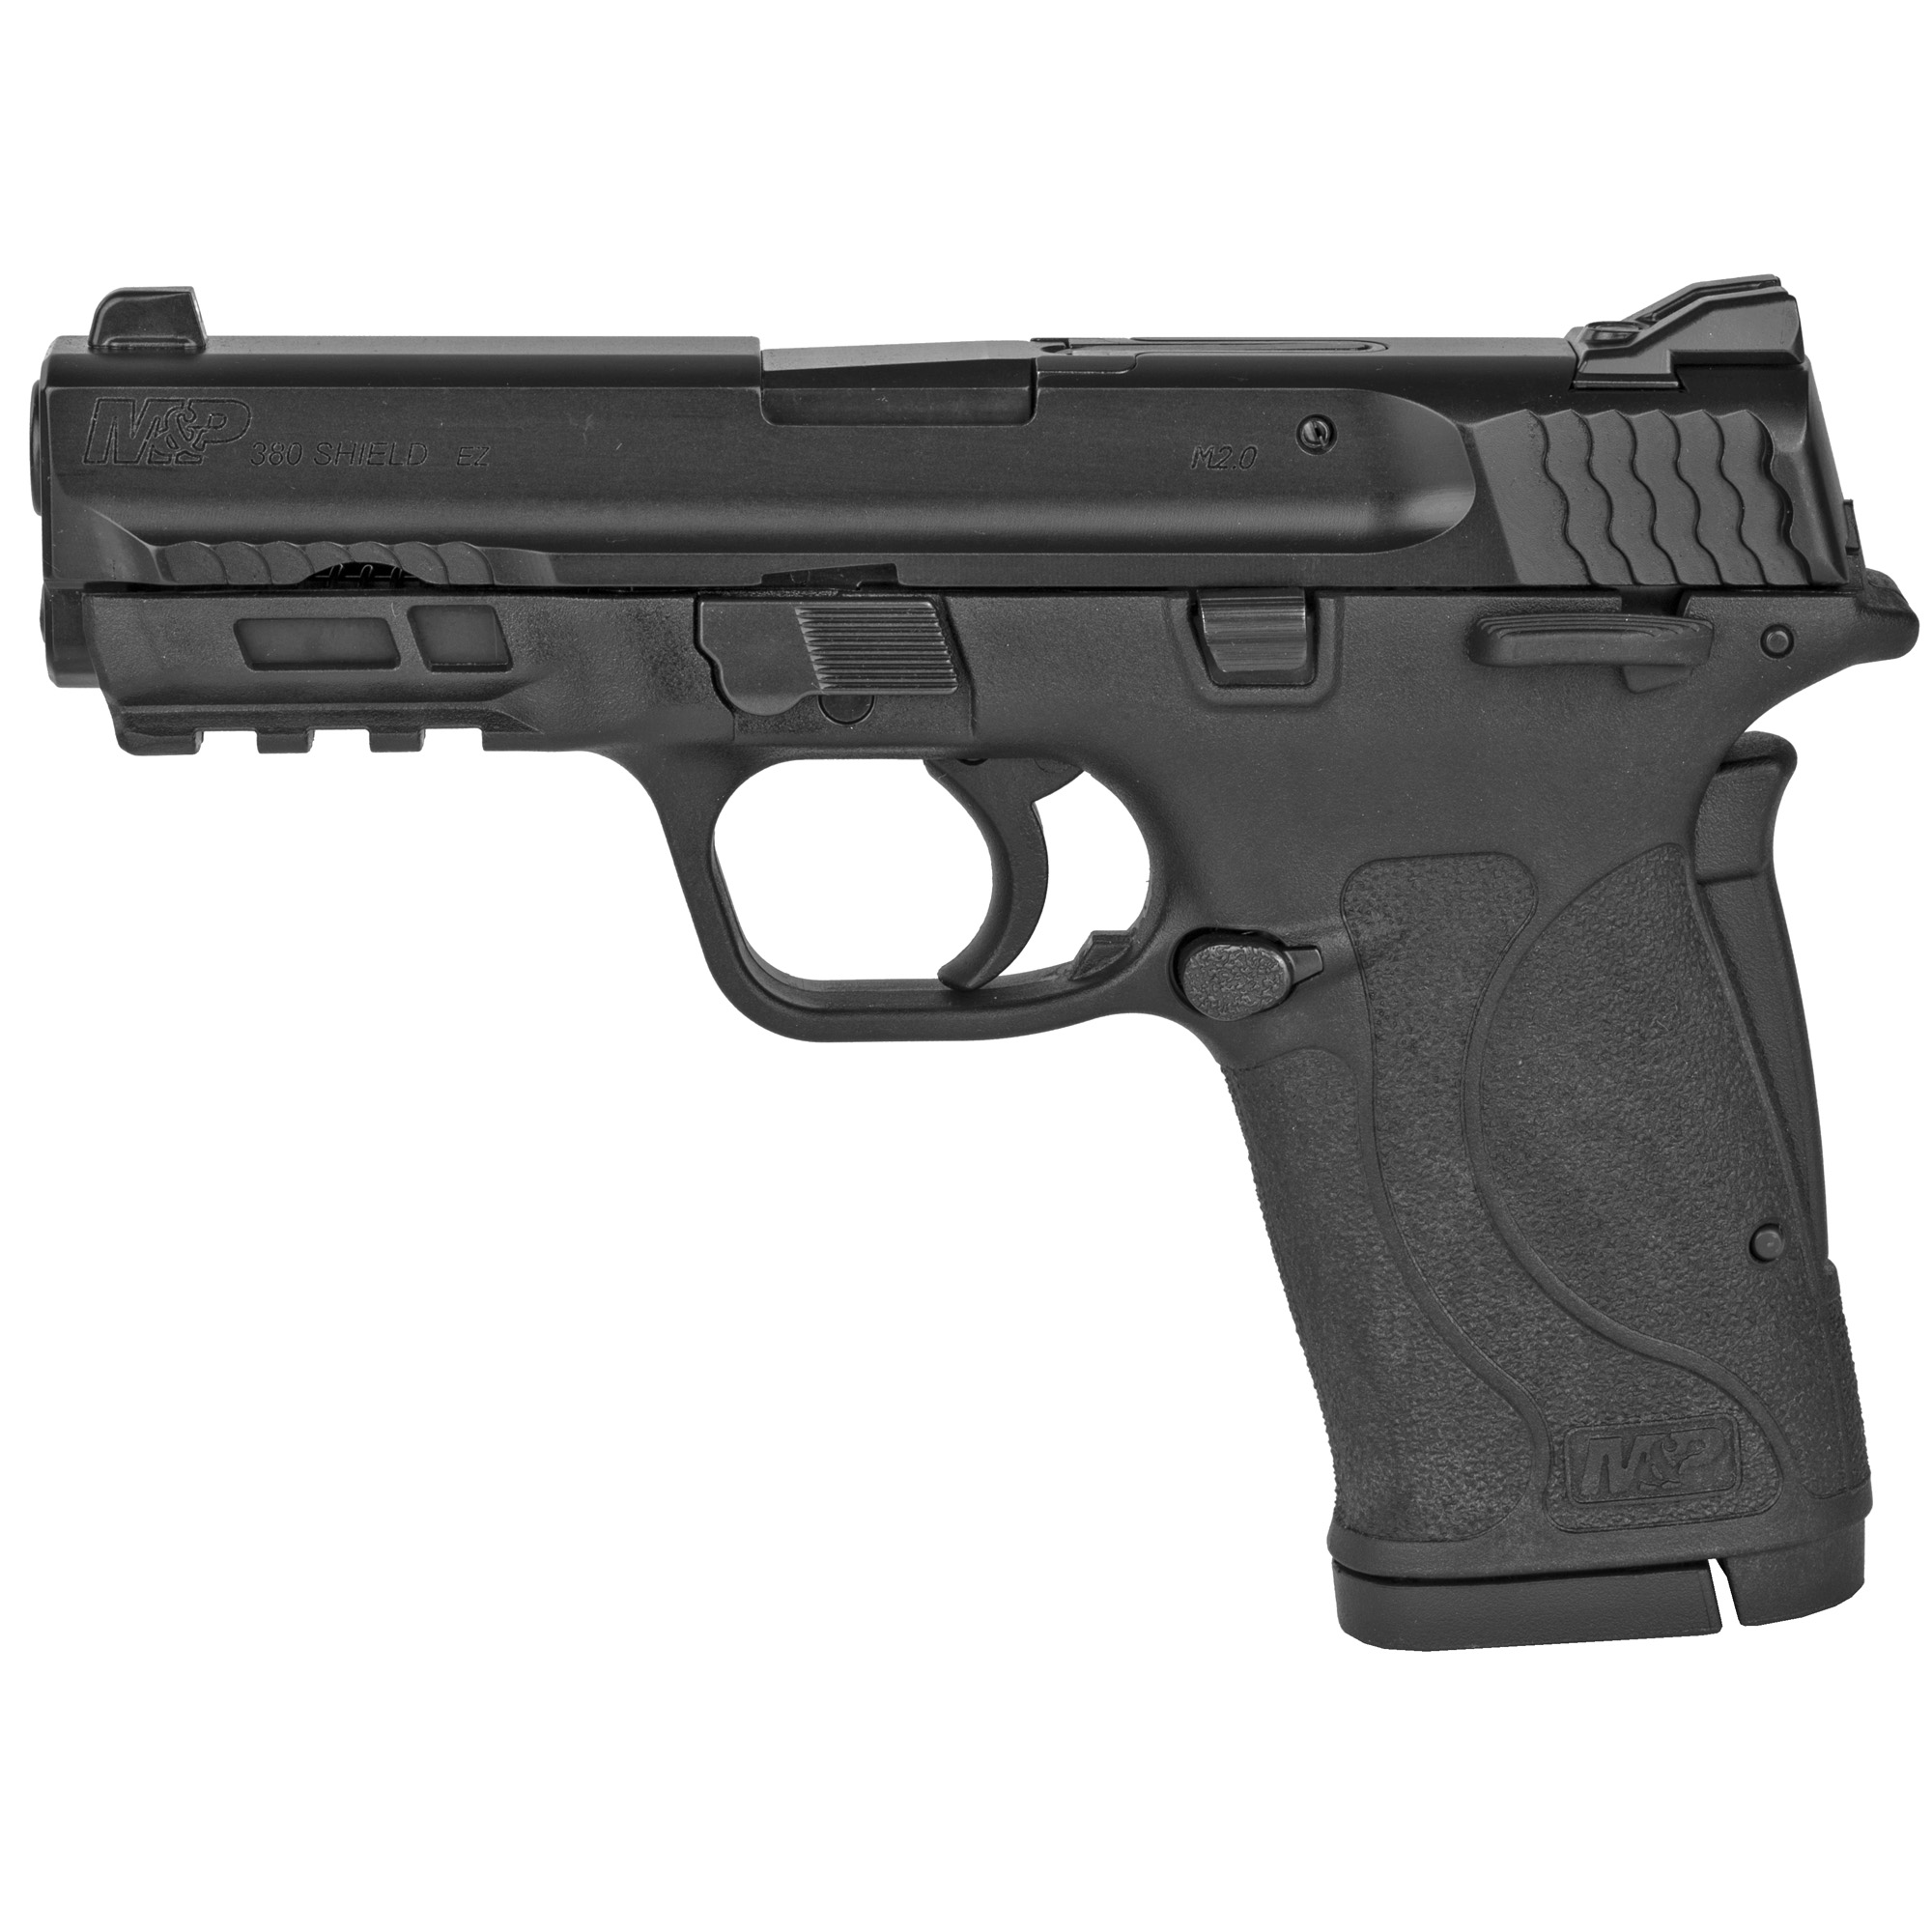 Smith & Wesson M&P 9 Shield EZ M2.0 Thumb Safety 9mm Pistol Stainless/Silver, 3.675" Barrel, 8+1 Rounds, Polymer Grips, 3-Dot